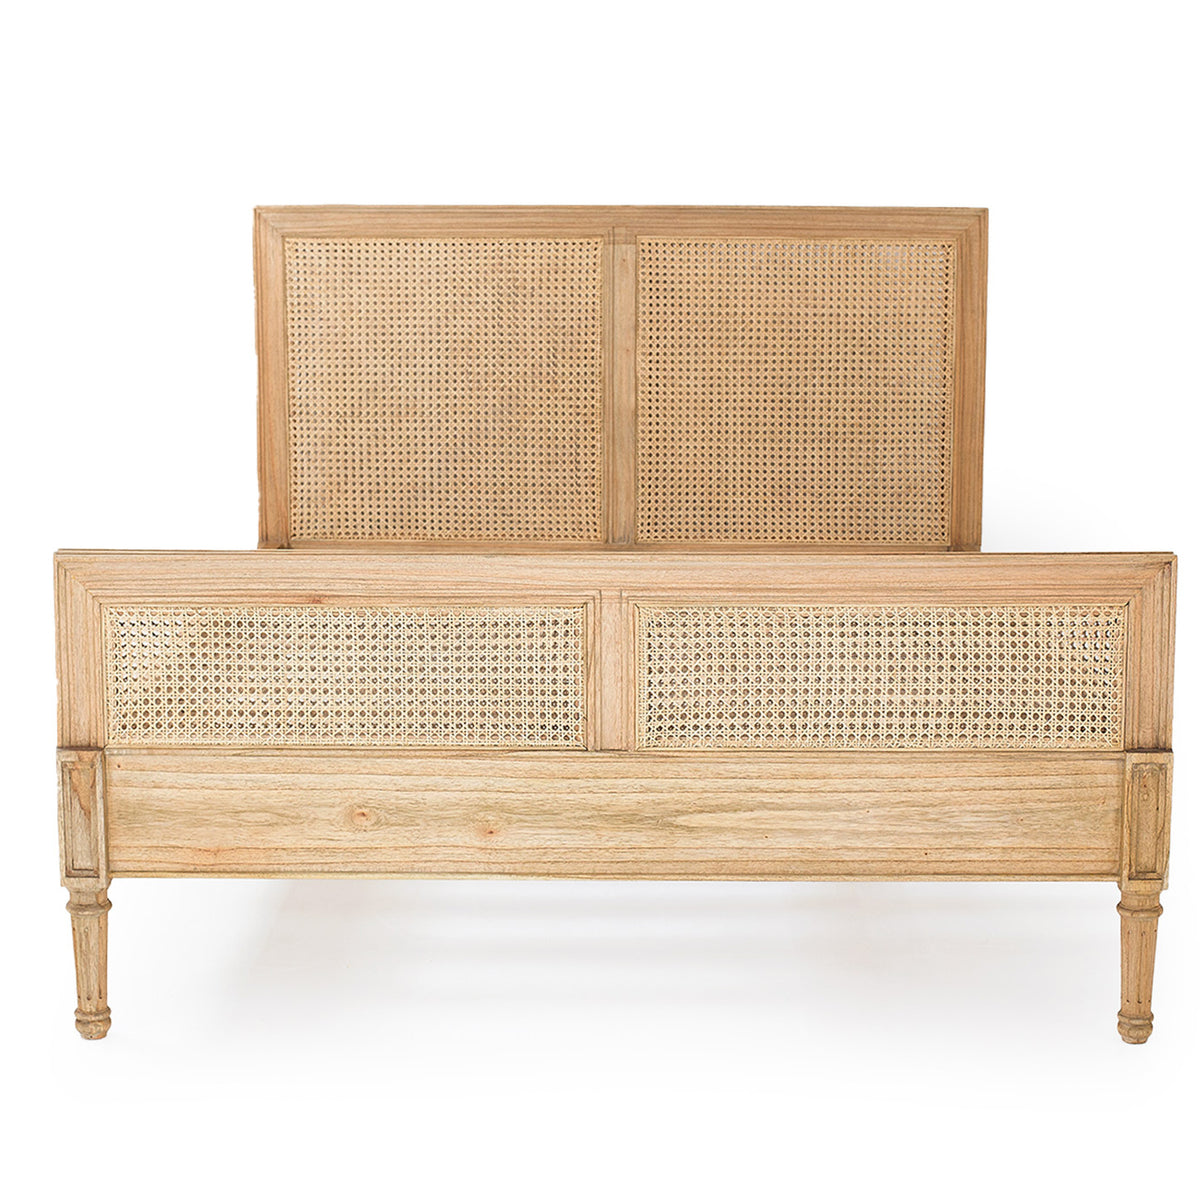 Percy Timber and Cane Bed -  Weathered Oak Range - Notbrand(1)